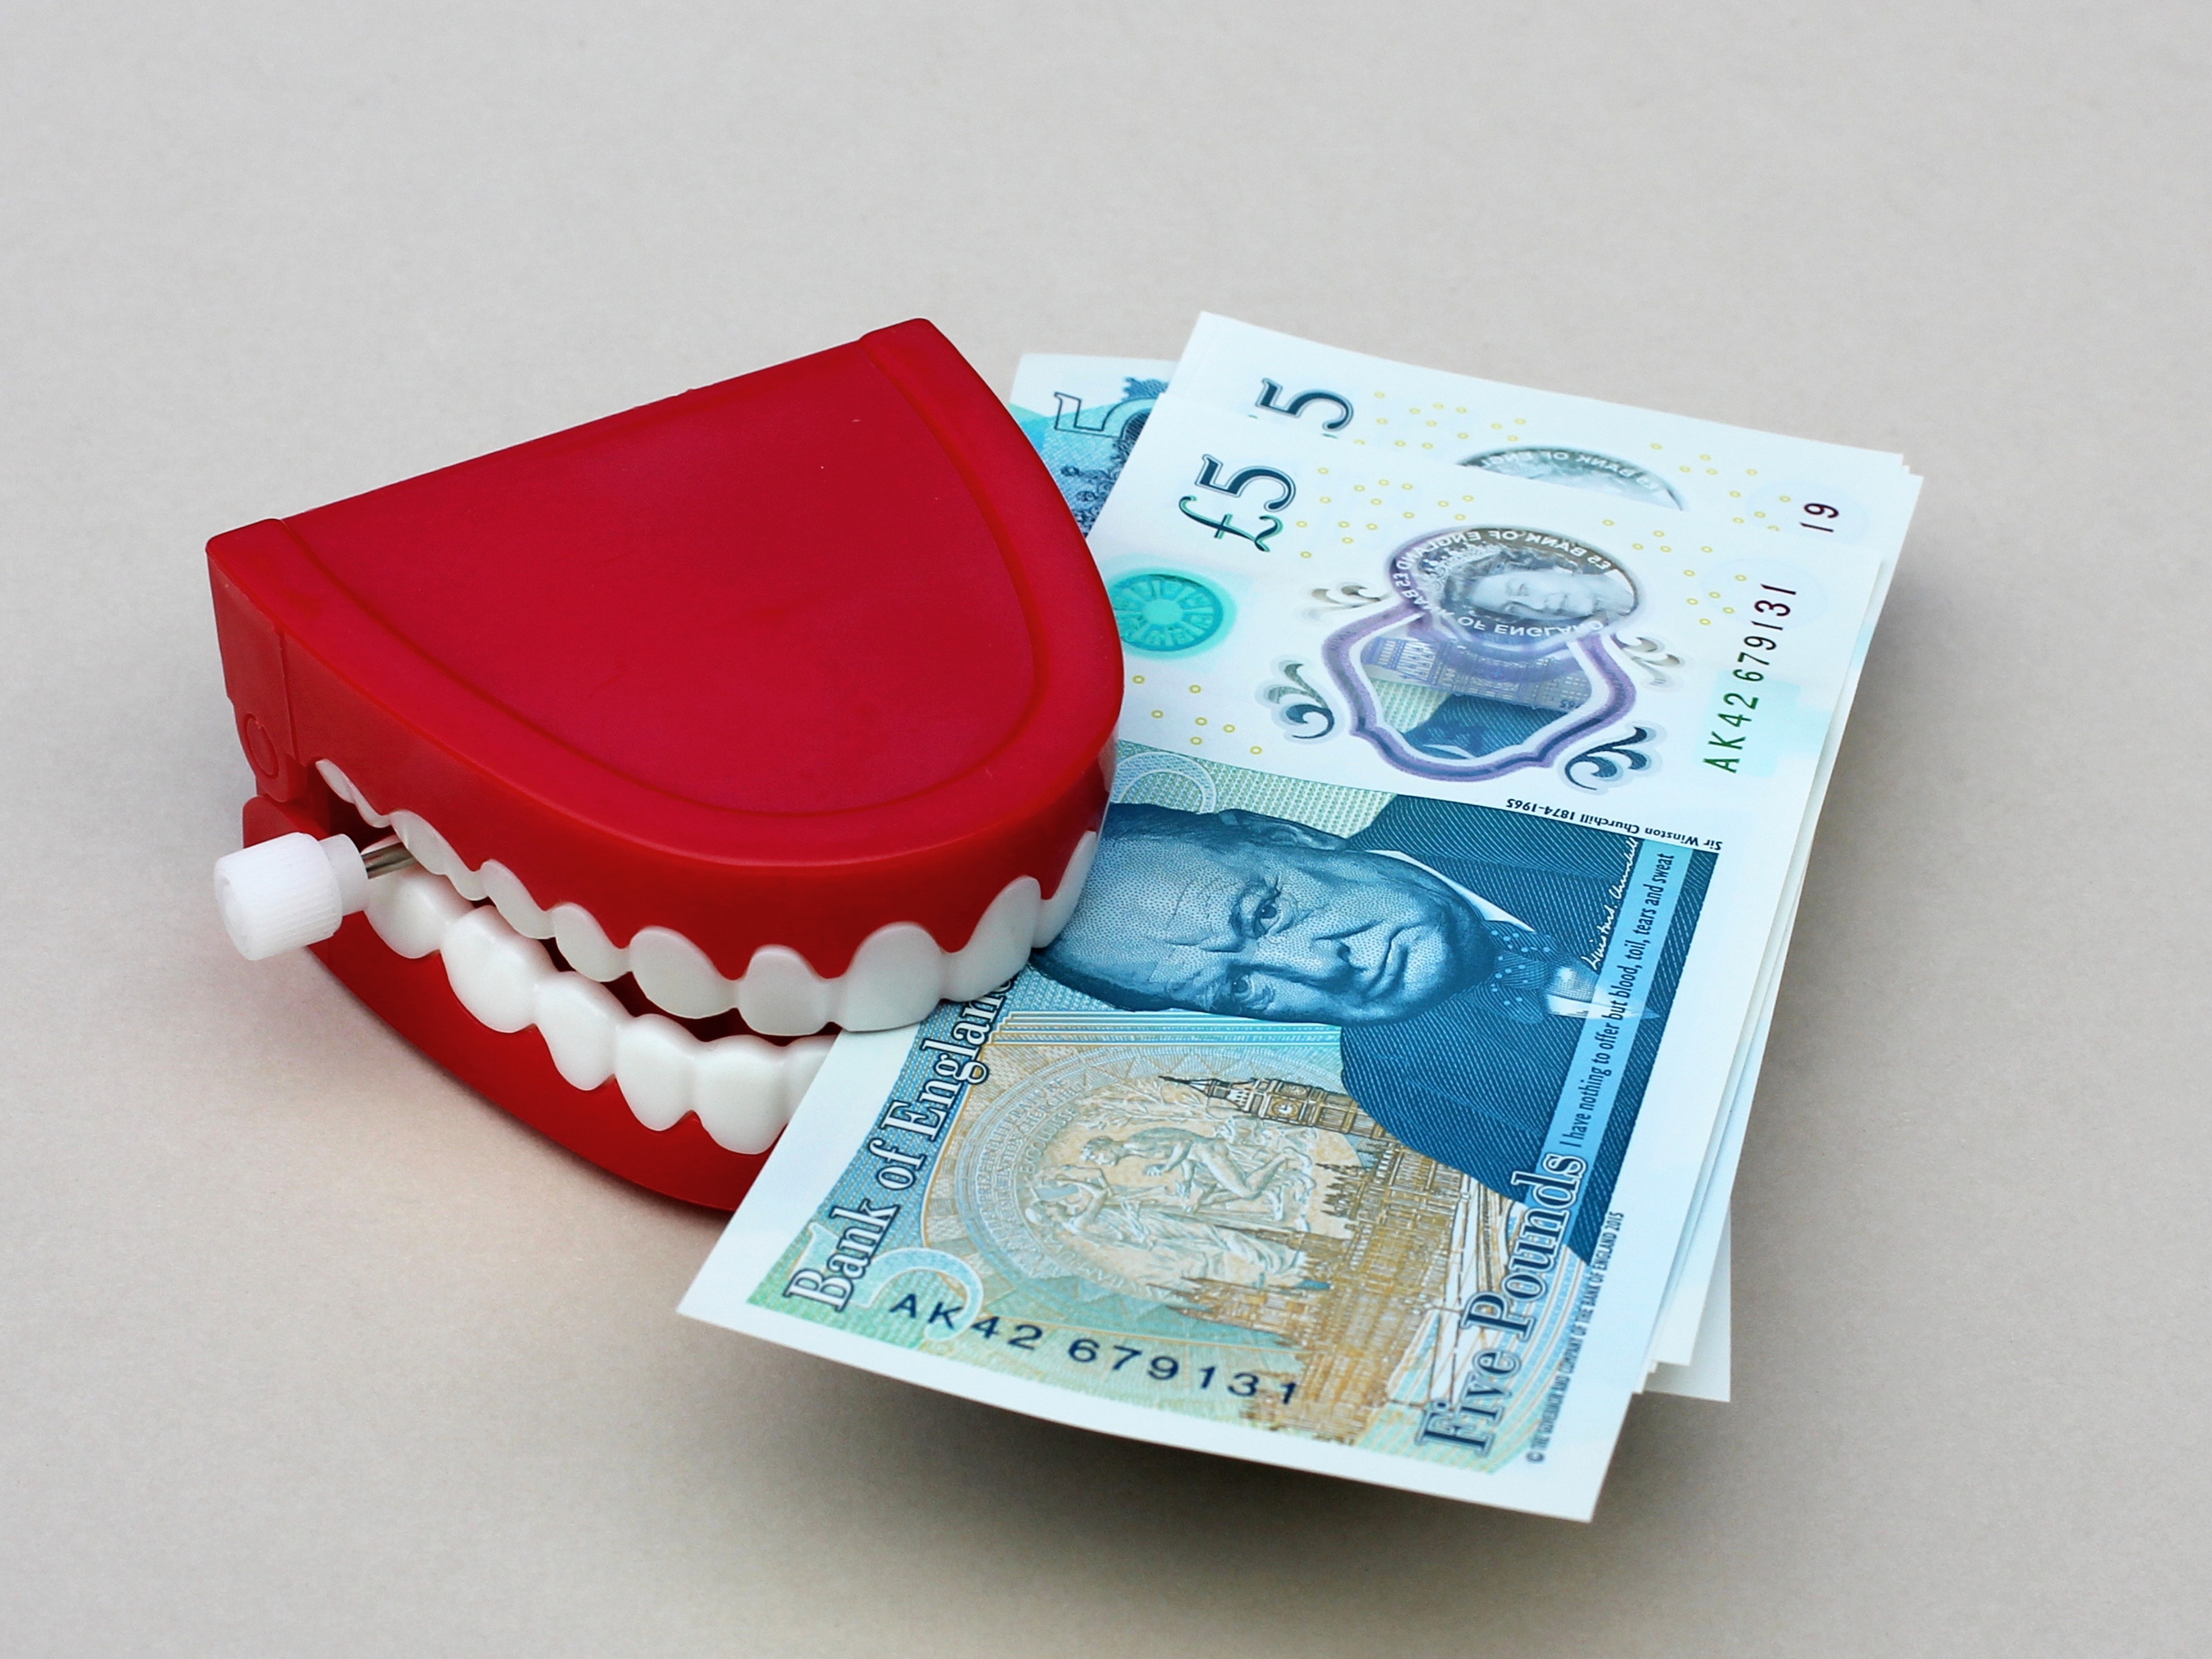 Red teeth holding money at the Glasgow orthodontics clinic.